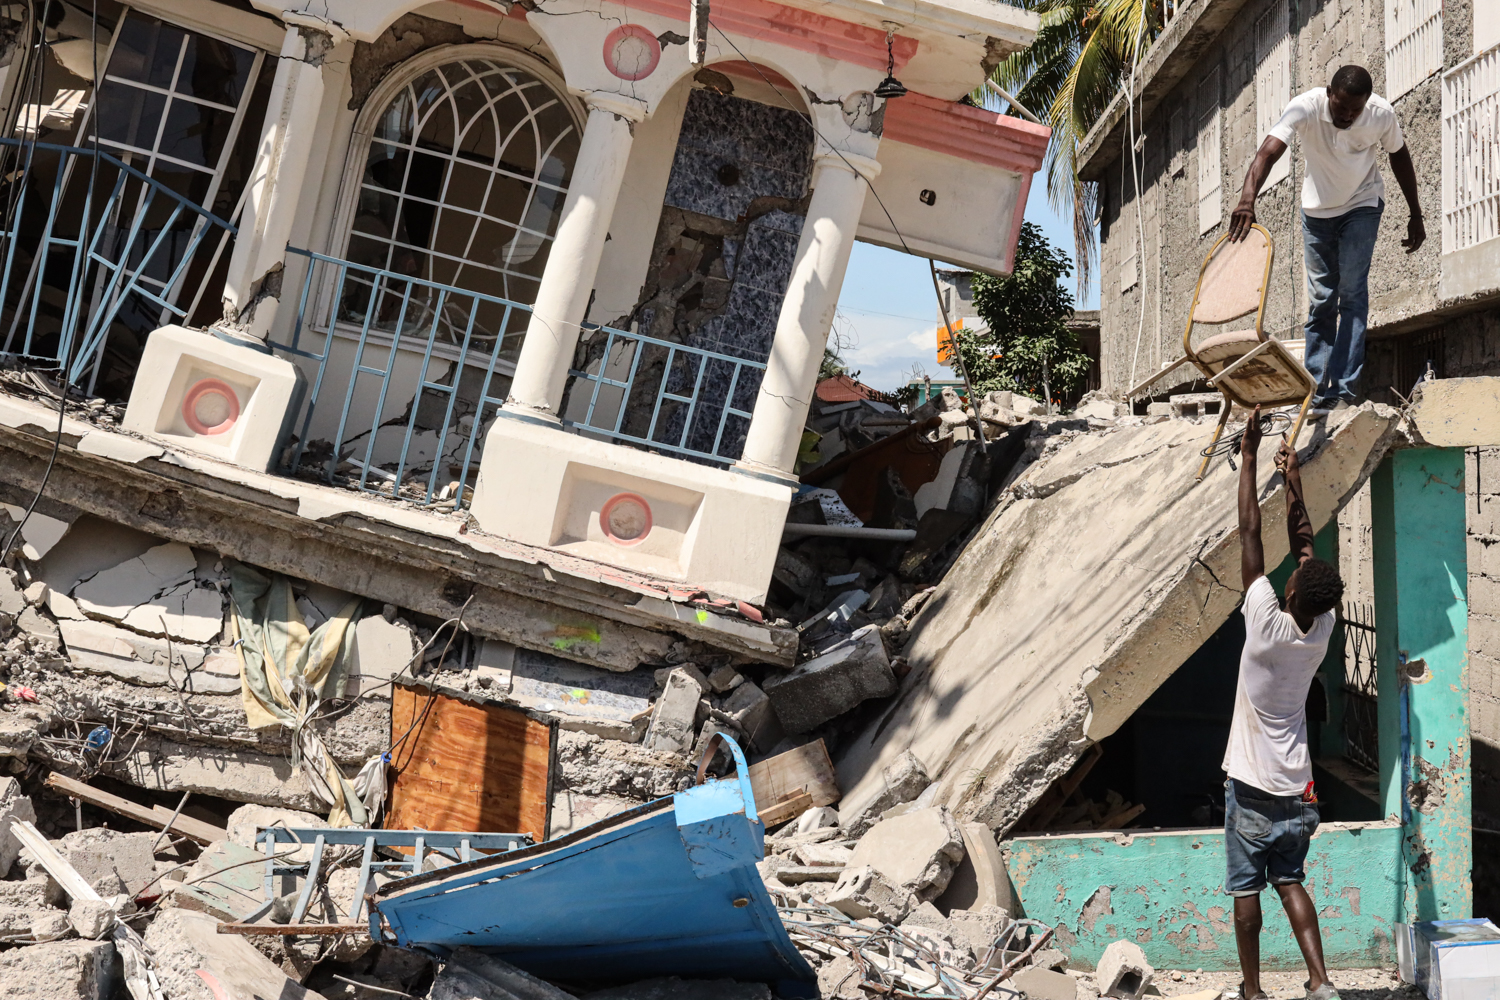 Residents survey a damaged building following a 7.2-magnitude earthquake in Les Cayes, Haiti, on&nbsp;Aug. 15.